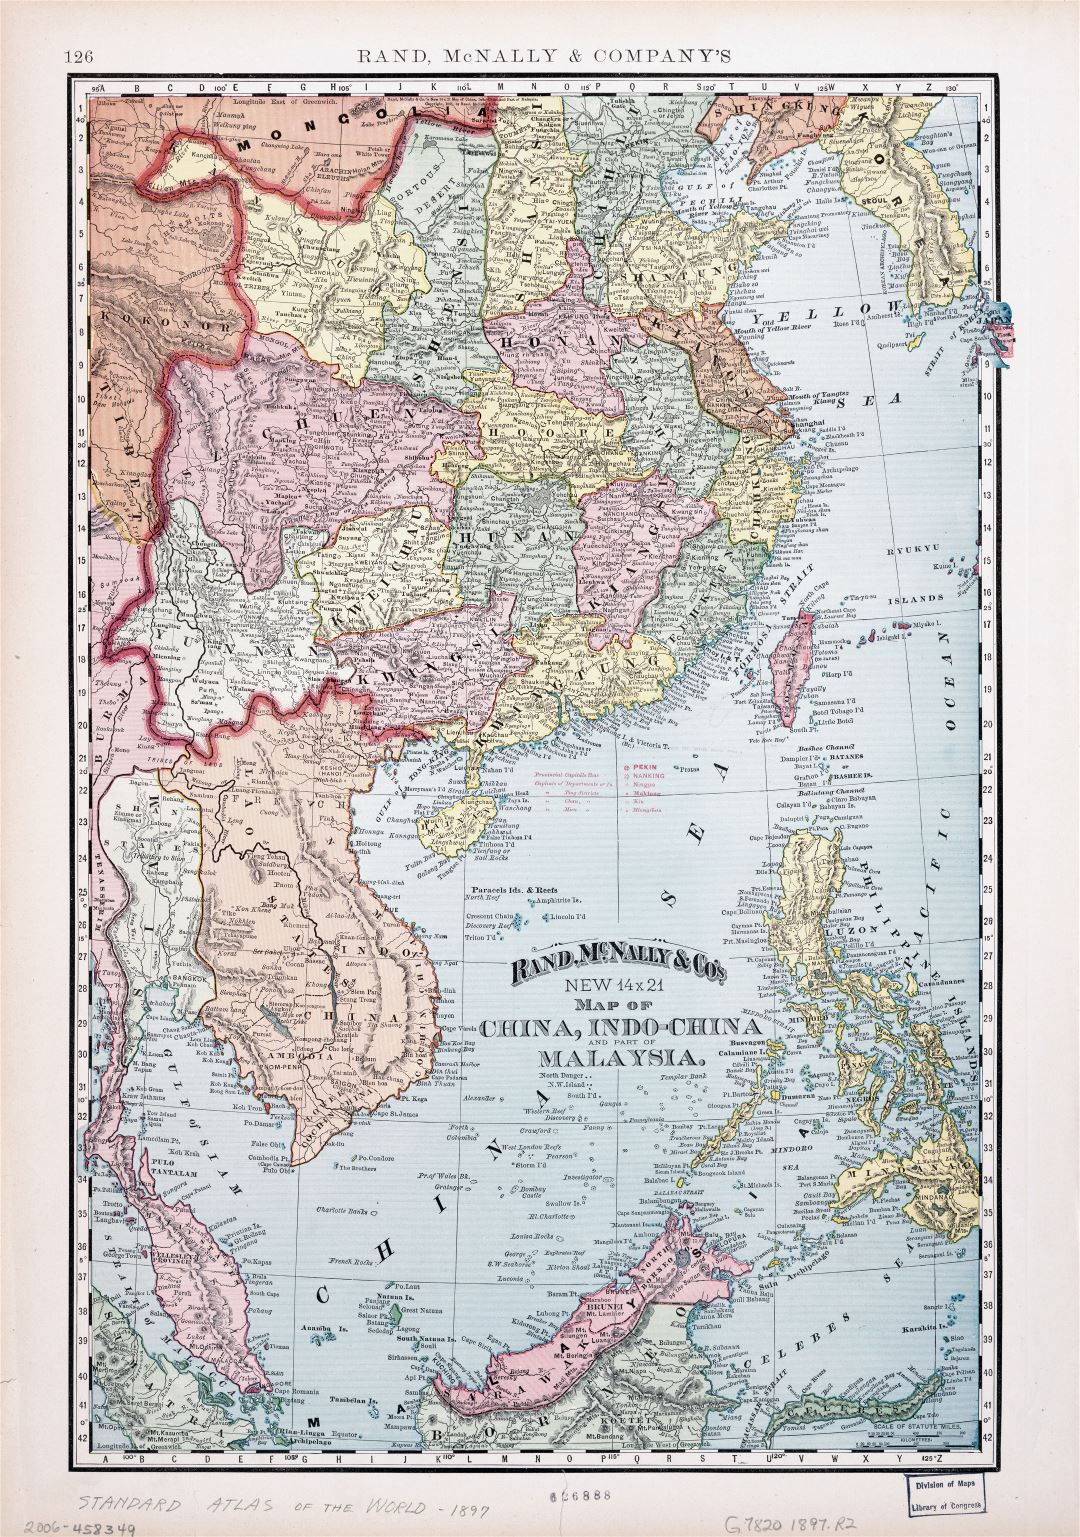 Large scale old political map of China, Indochina and part of Malasysia - 1897